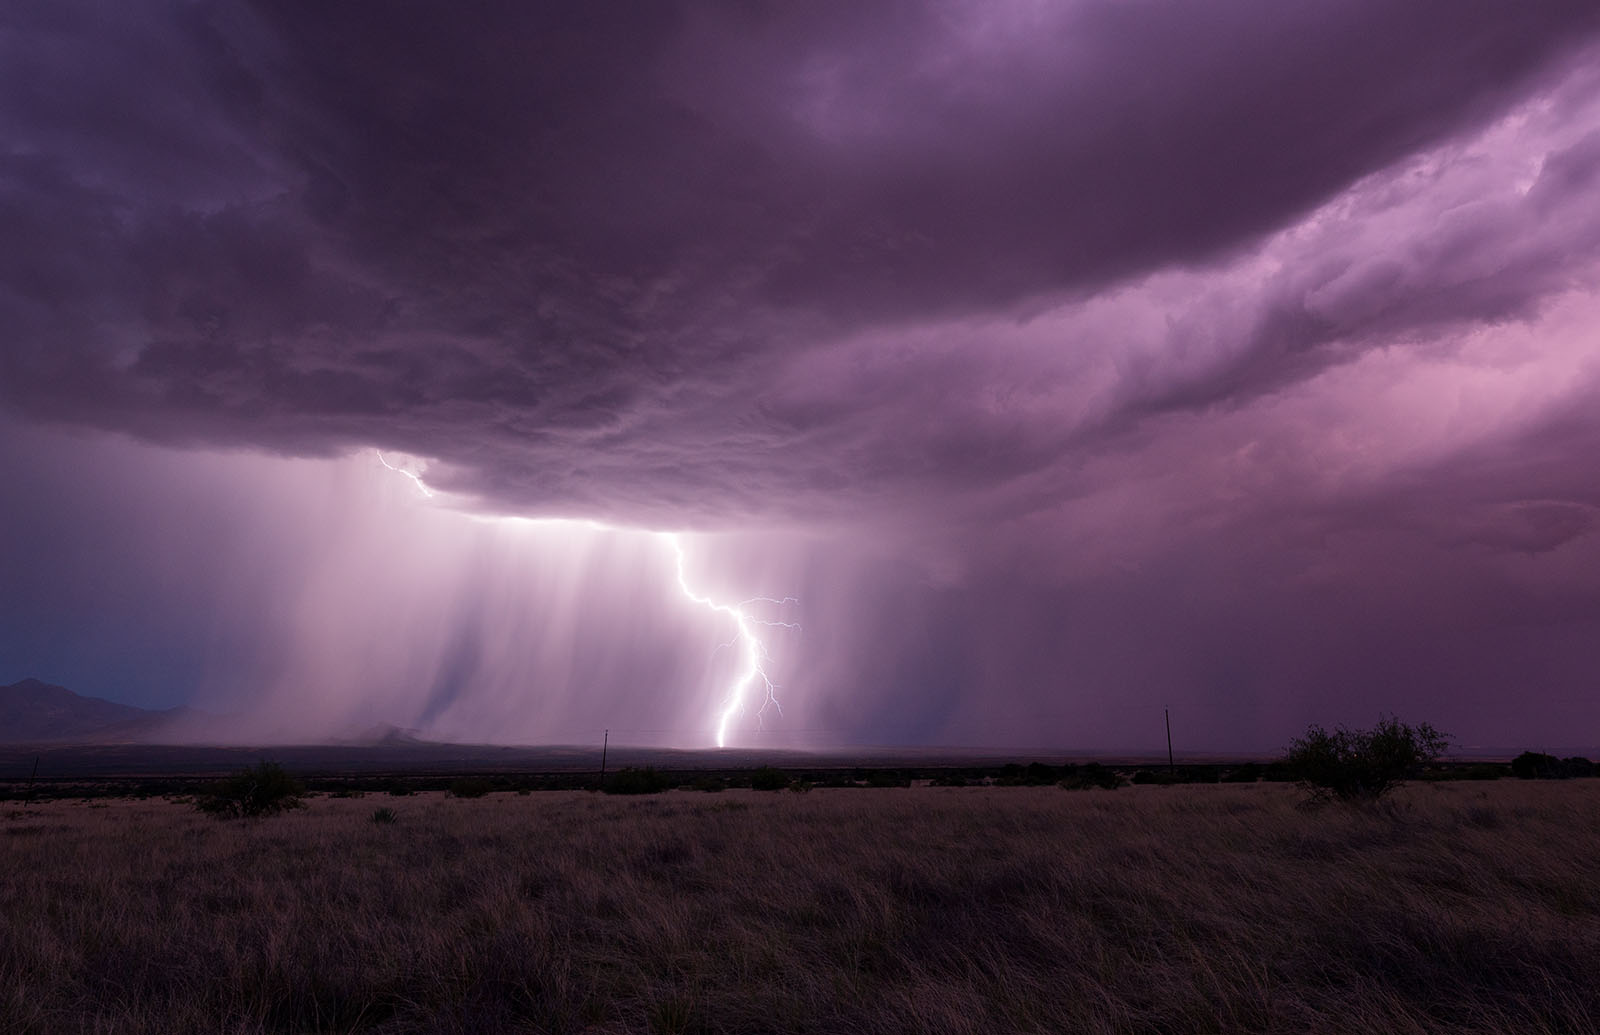 Stunning photos show rare upside-down lightning streaking up into the sky